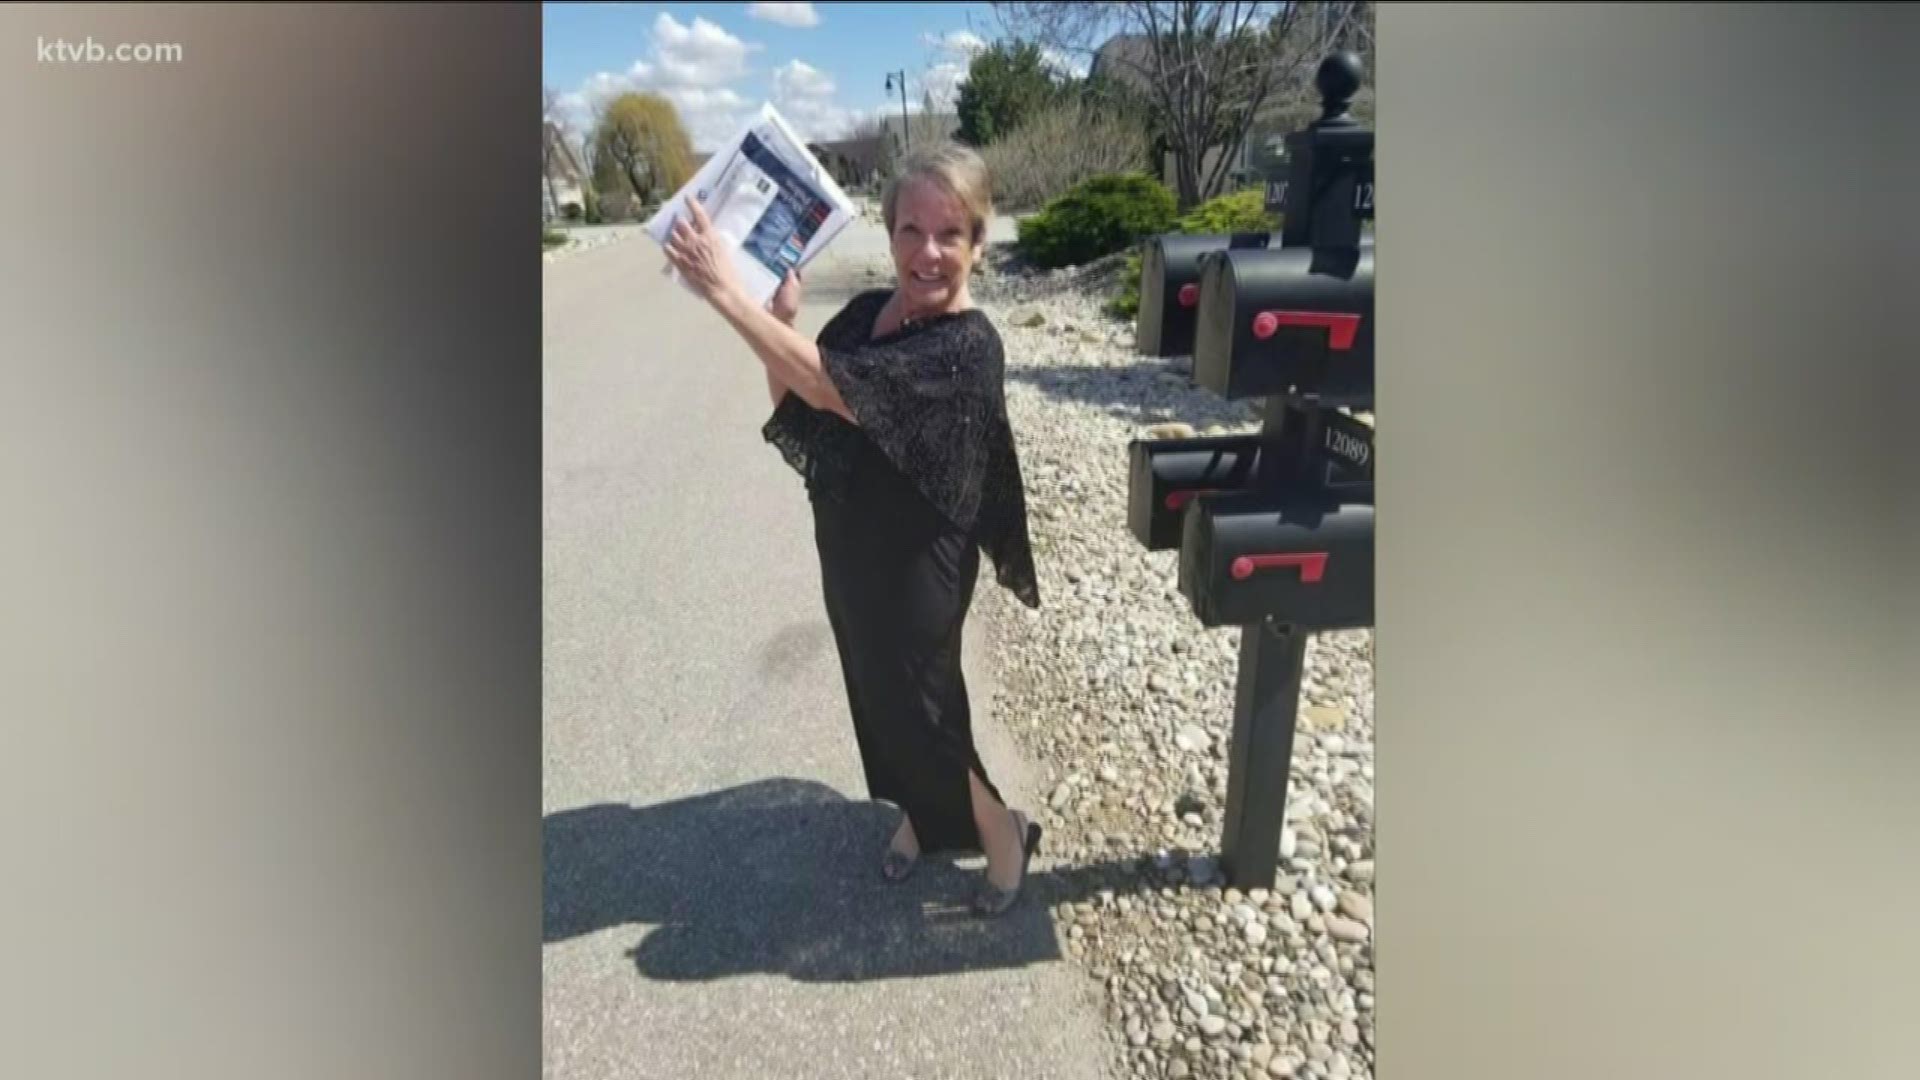 Sandy Banta entertains her neighbors by wearing different outfits each time she picks up her mail.